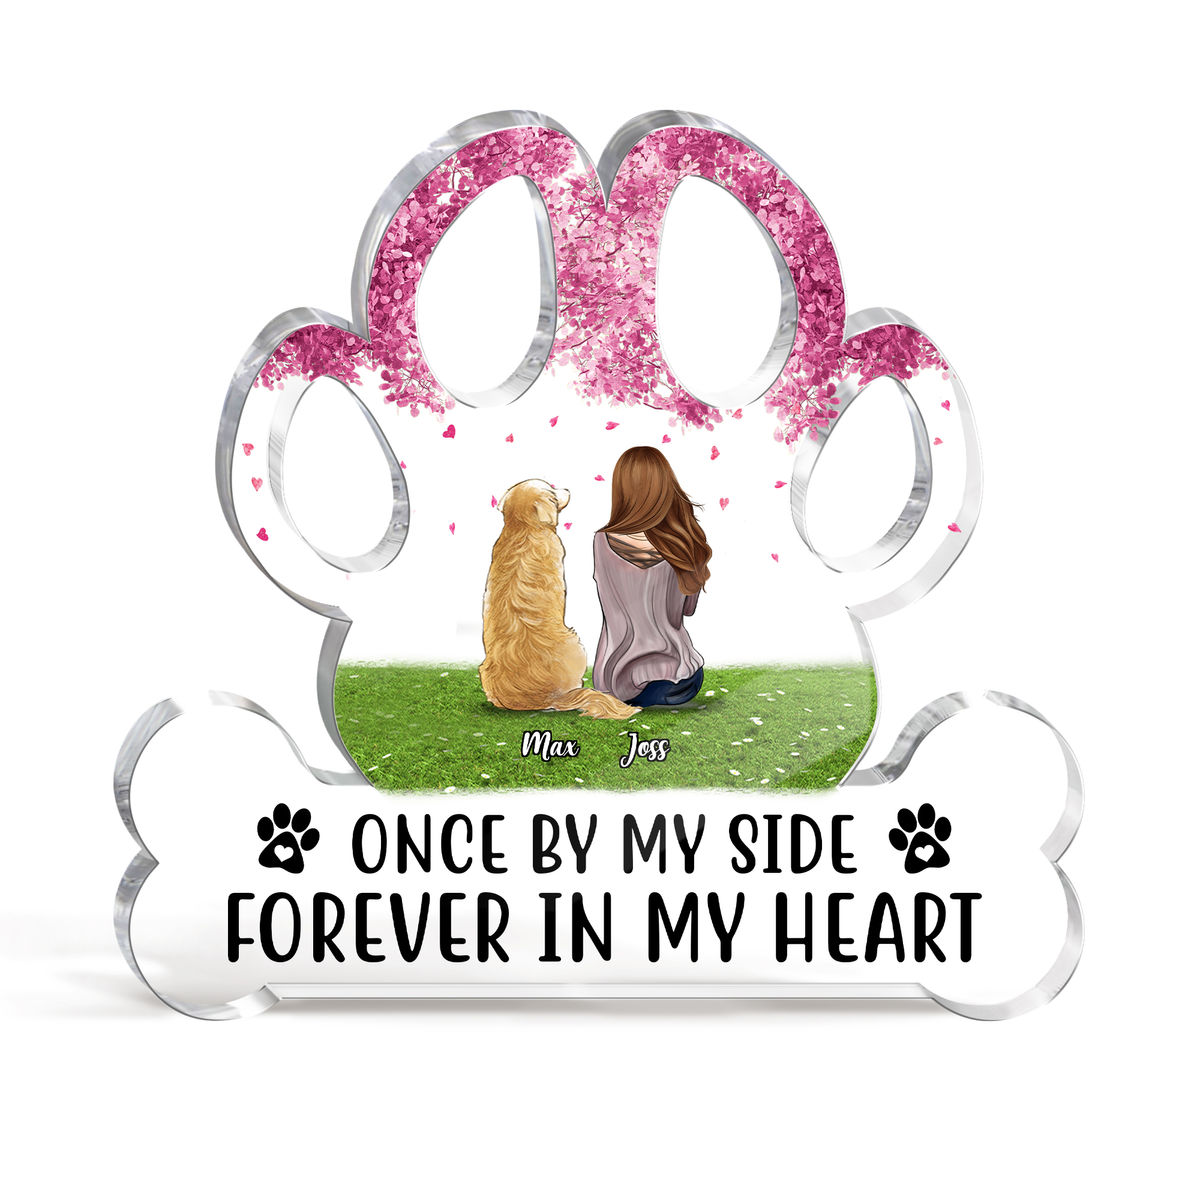 Girl and Her Dog Personalized Acrylic Dog Plaque - Once by my side forever in my heart_1